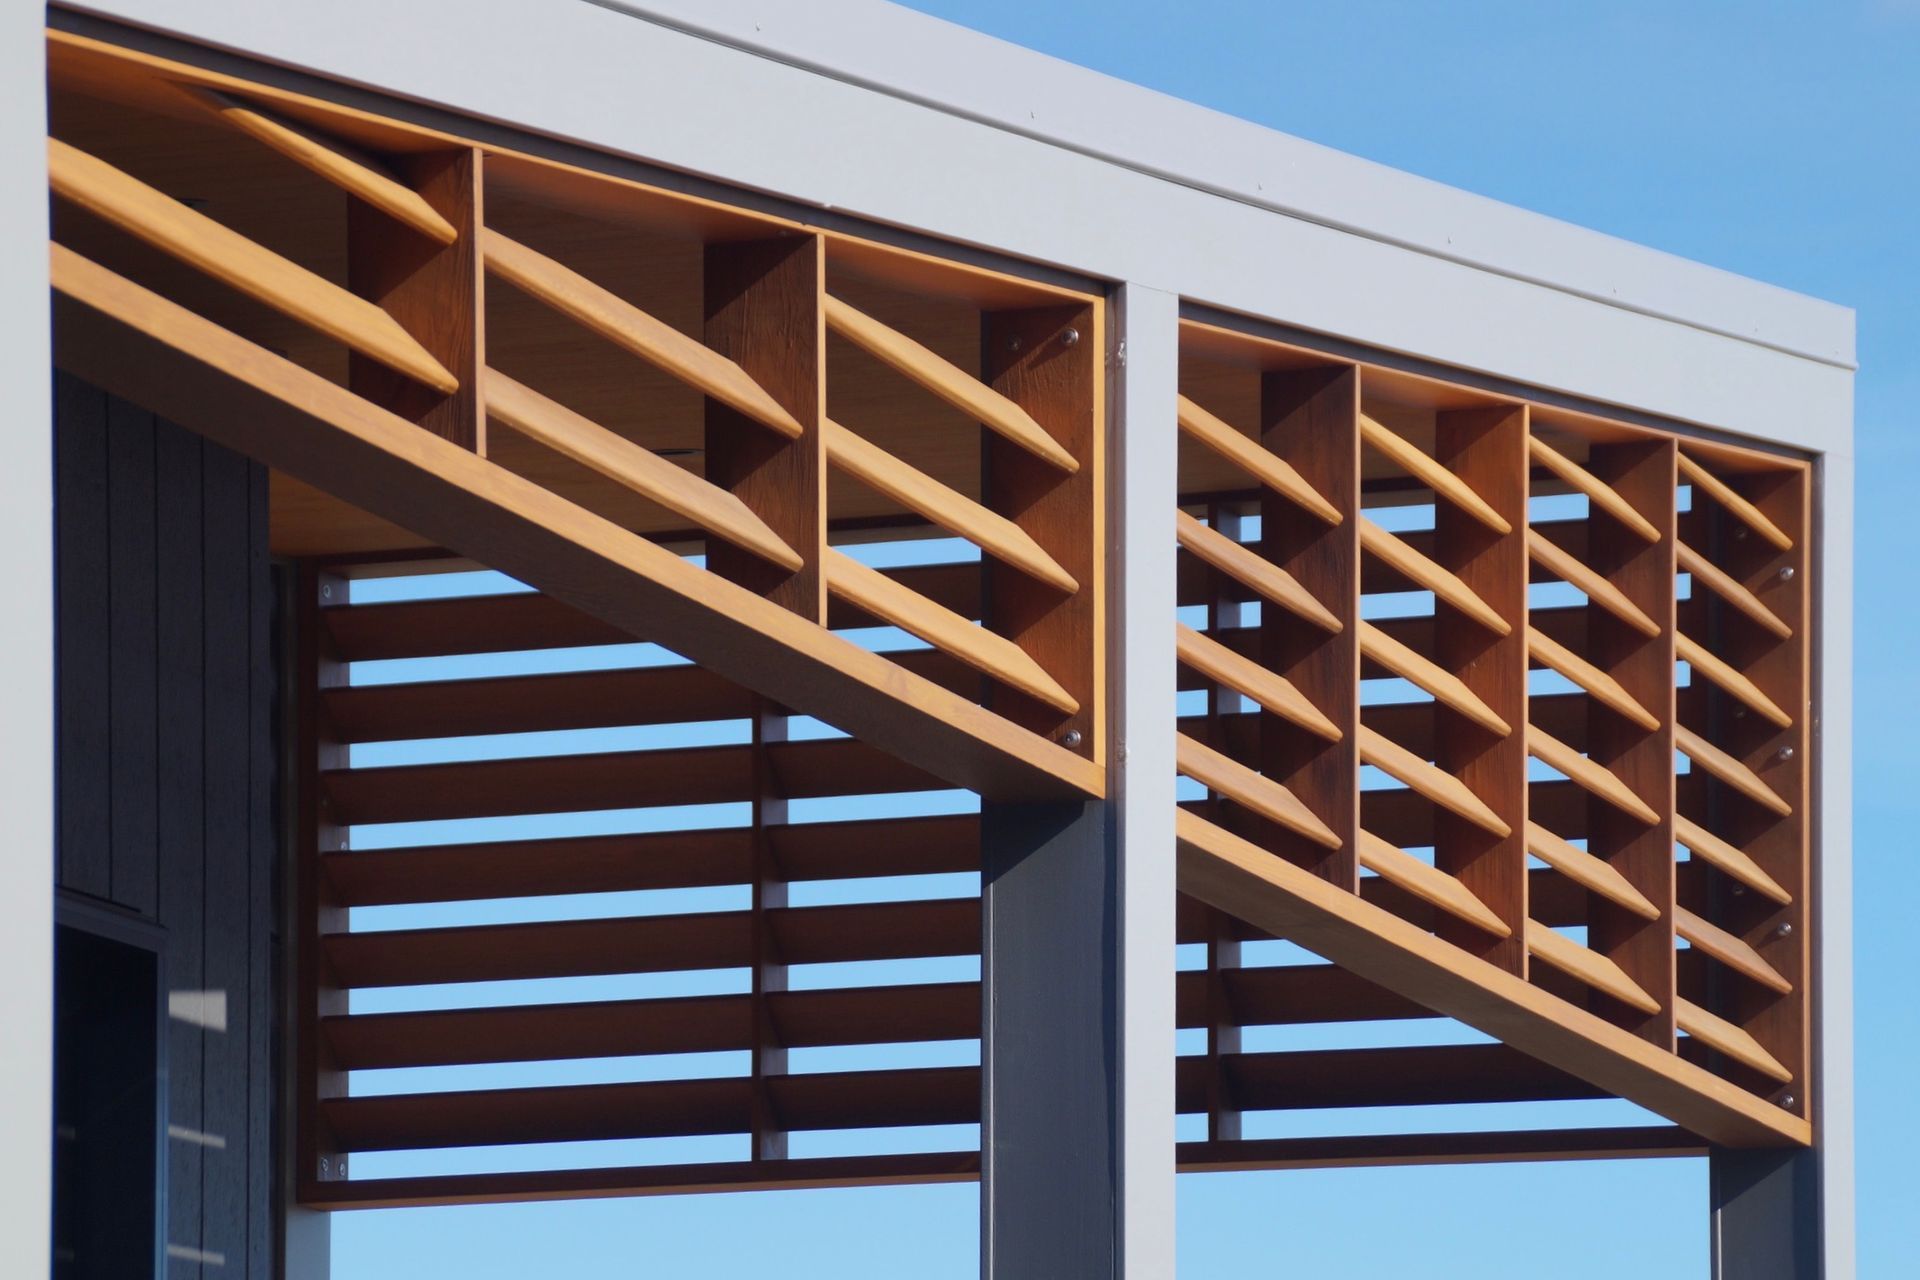 Scandic can create custom timber pieces to suit any application.